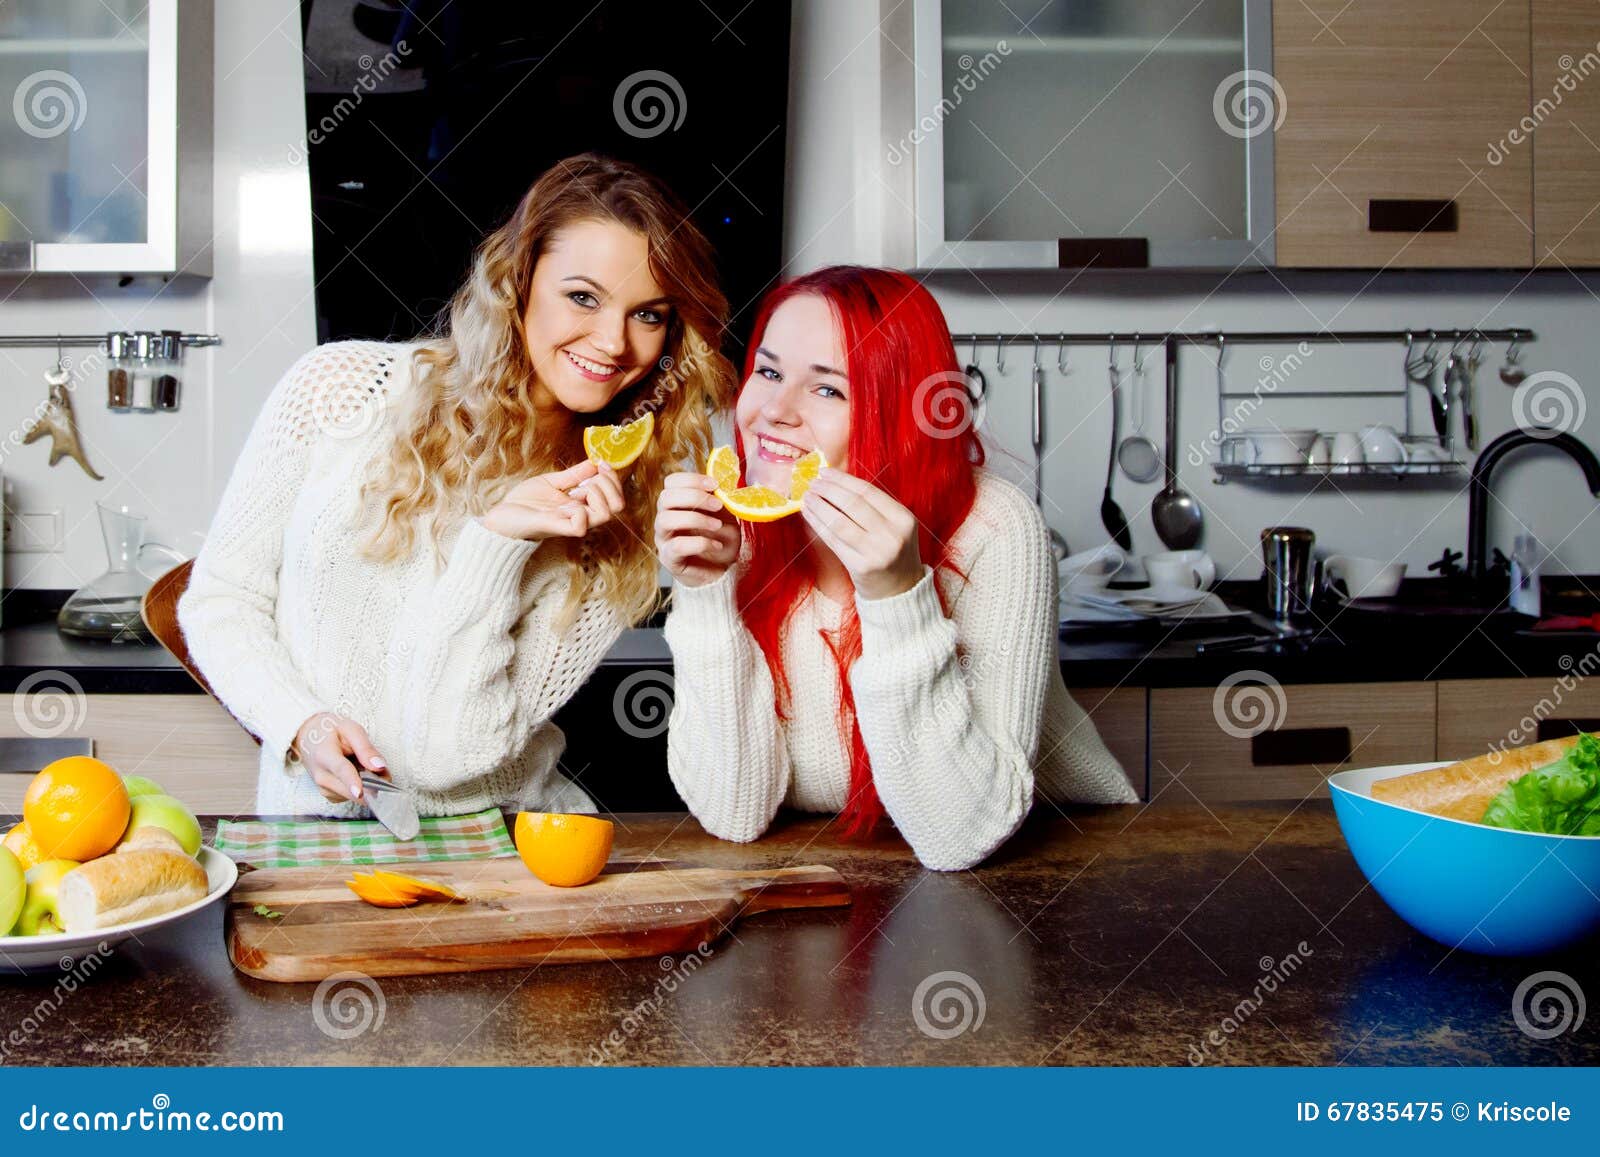 Two Young Girls In The Kitchen Talking And Eating Fruit Healthy Lifestyle Stock Image Image Of Home Cooking 67835475